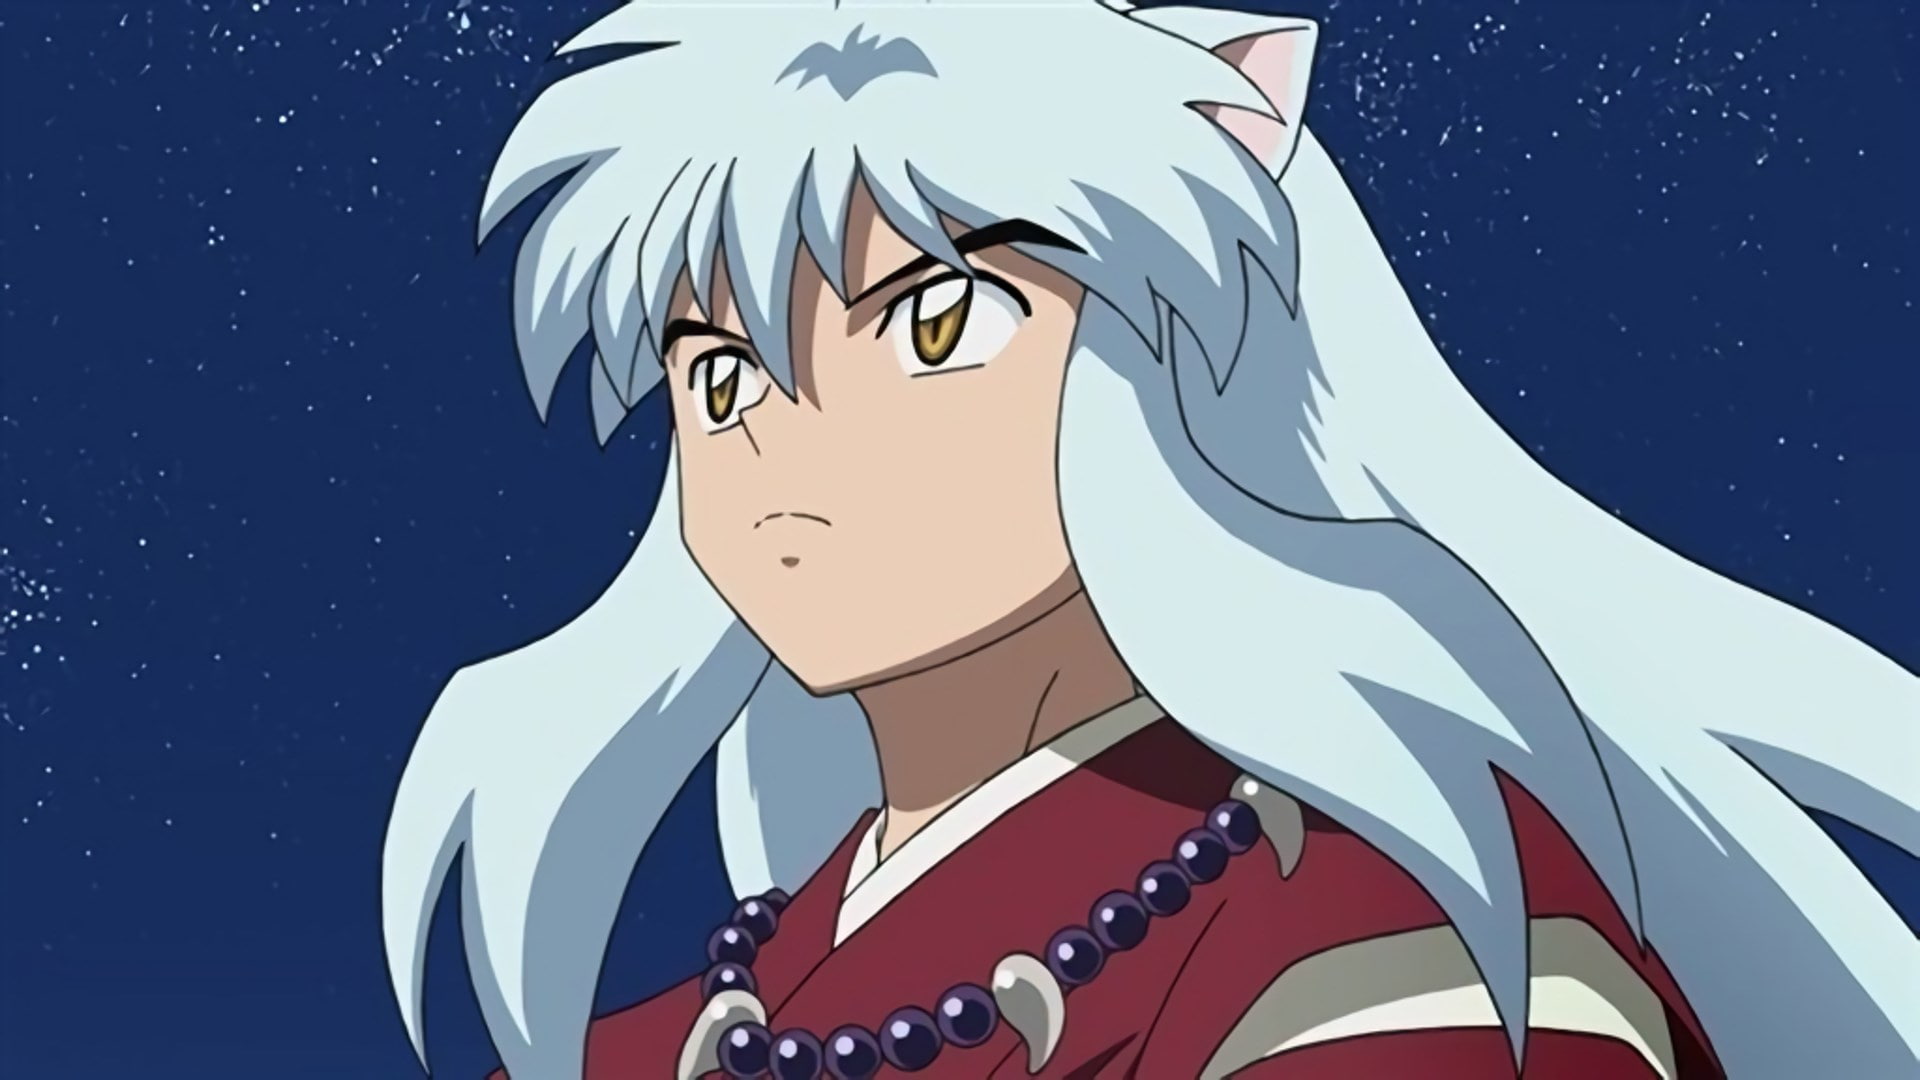 inuyasha, one person, sky, blue, young adult, cartoon, nature